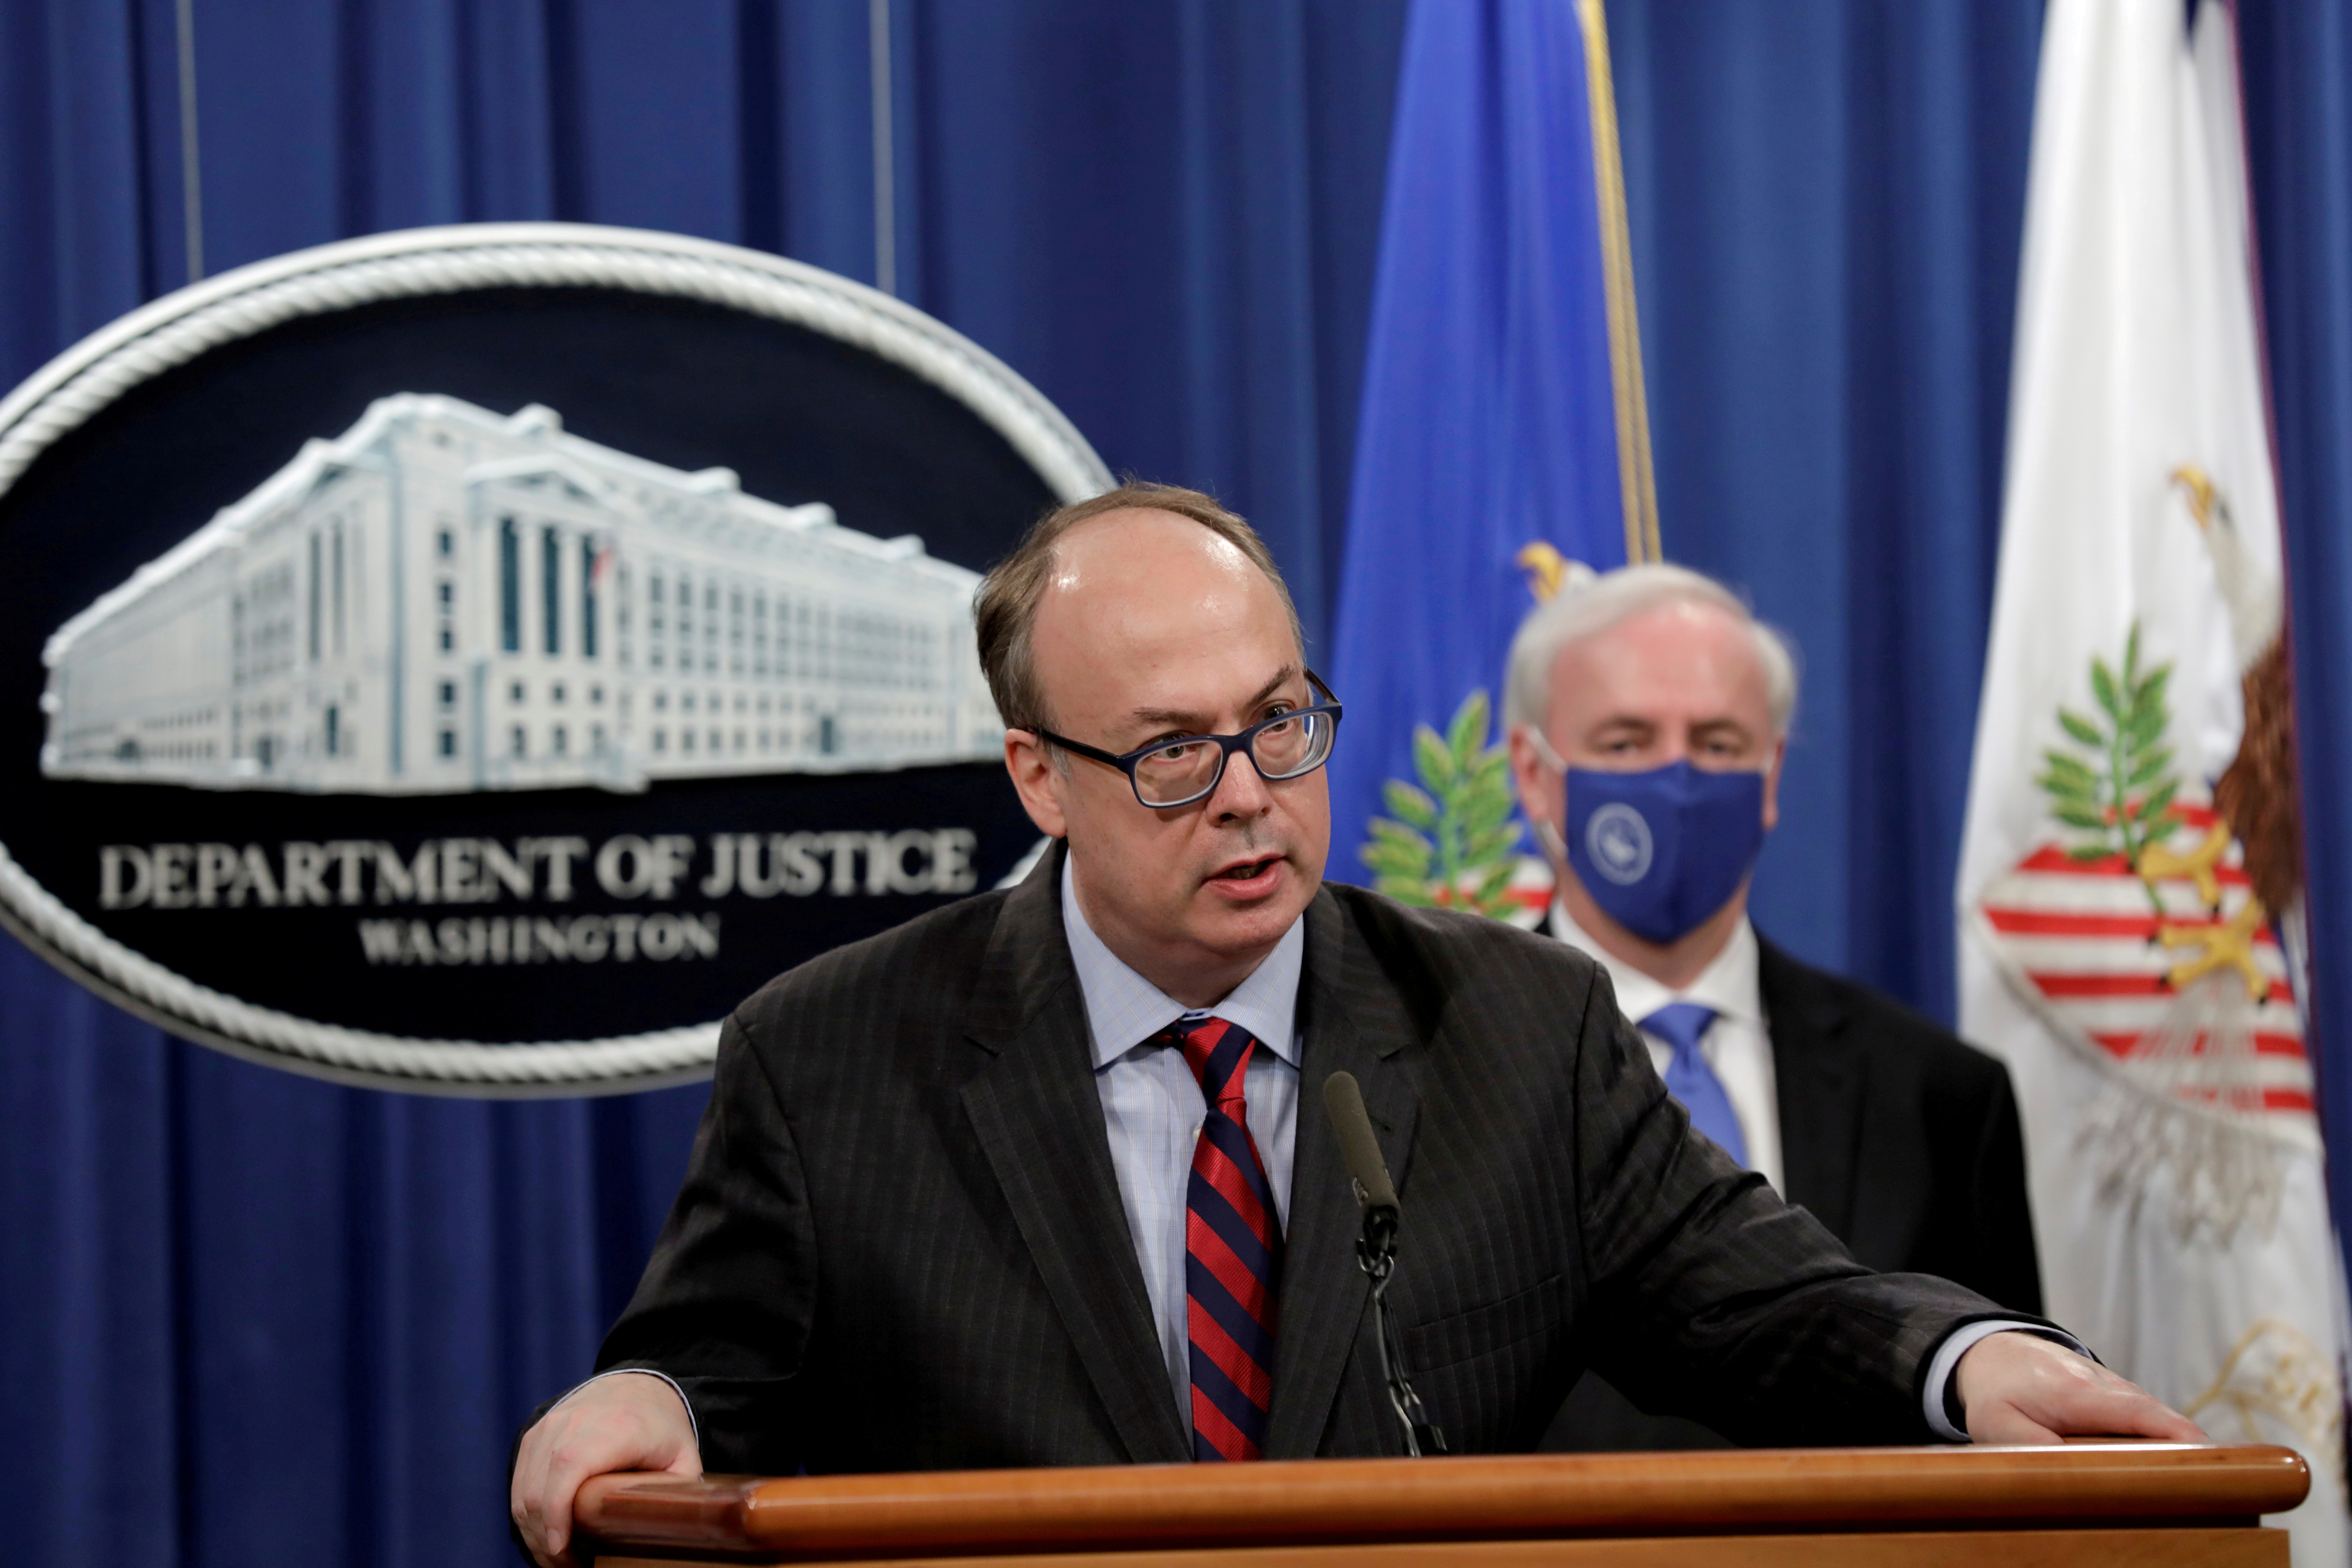 Then-Acting Assistant U.S. Attorney General Jeffrey Clark speaks next to Deputy U.S. Attorney General Jeffrey Rosen at a news conference at the Justice Department in Washington, U.S., October 21, 2020. REUTERS/Yuri Gripas/Pool/File Photo